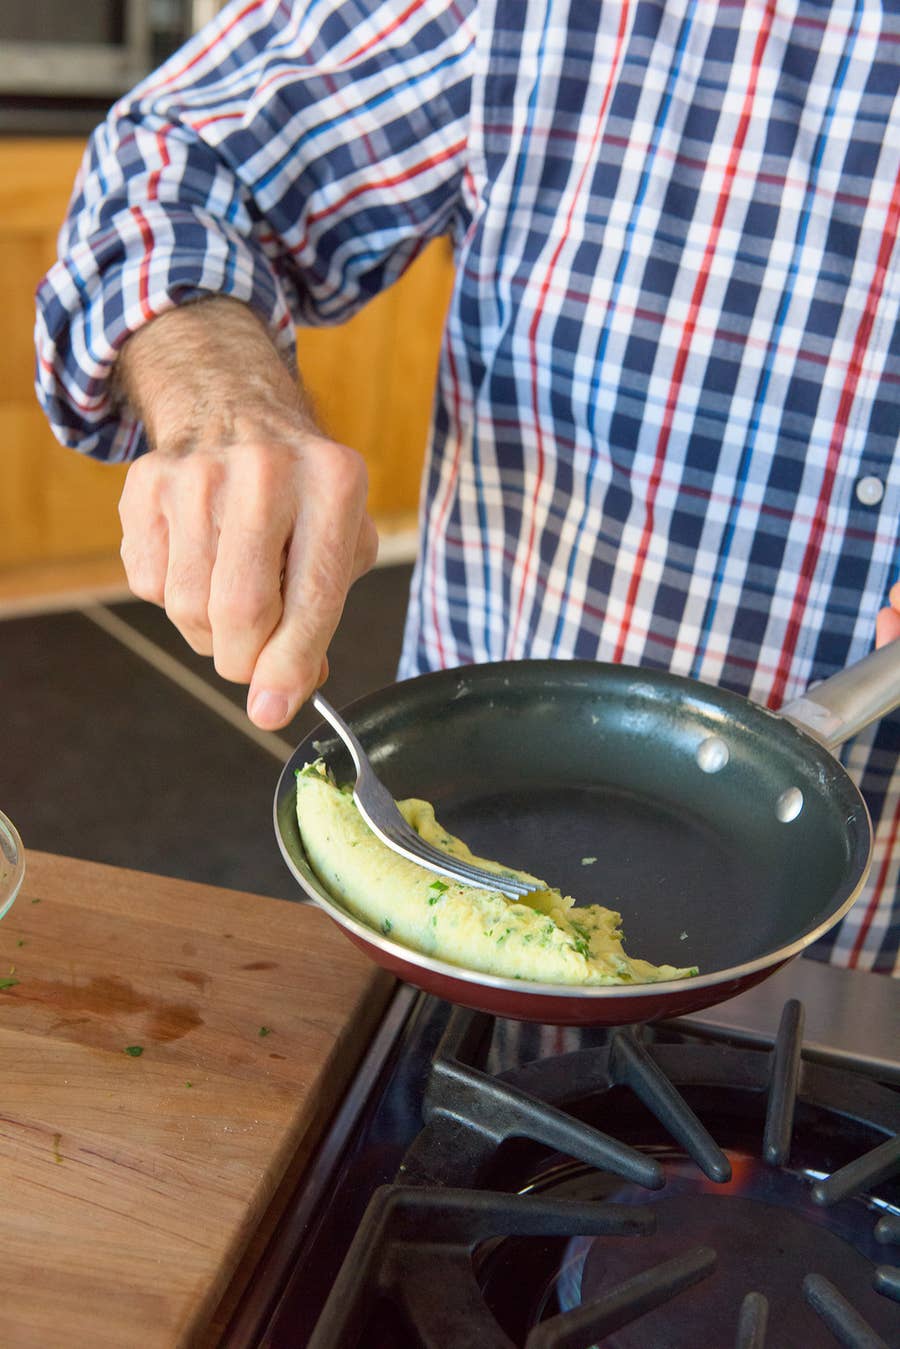 How Legendary French Chef Jacques Pépin Makes A Perfect Omelette